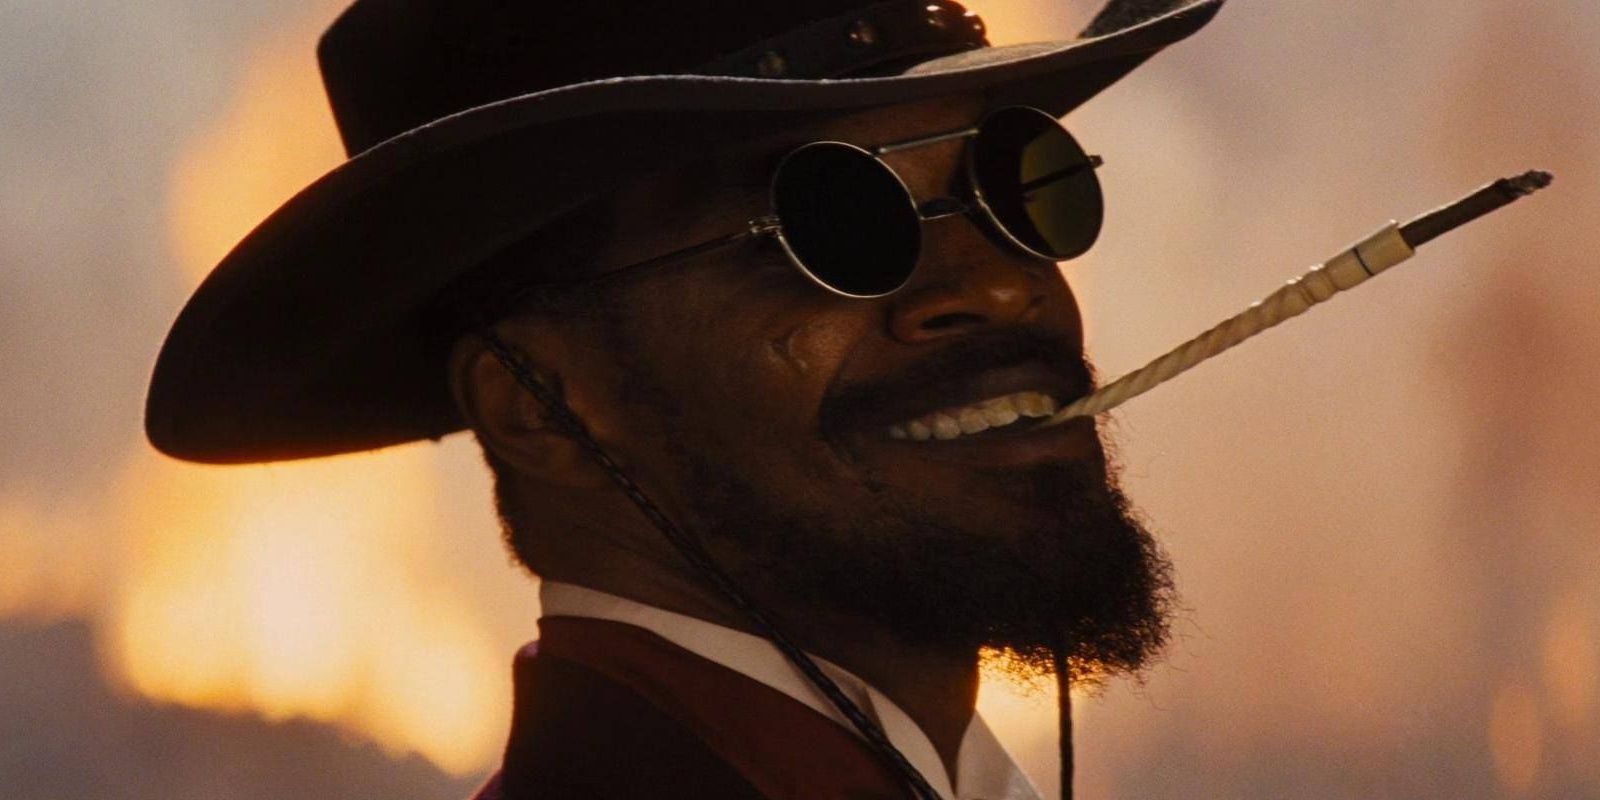 jamie foxx smiling with cigarette and sunglasses at end of django unchained